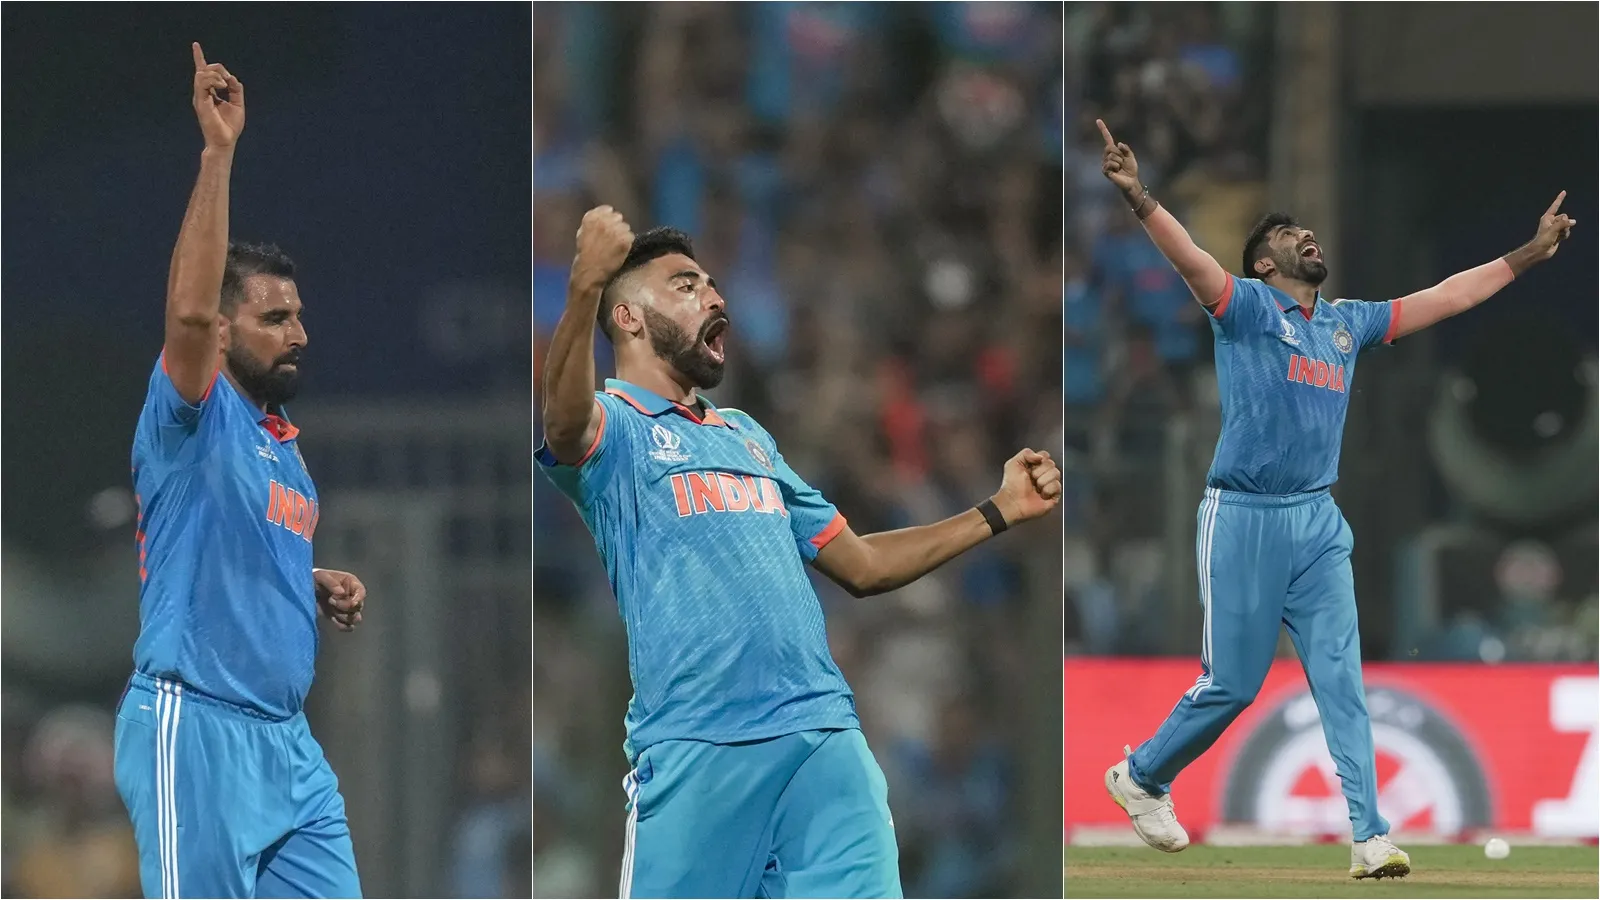 Speed, seam, swing, swag… the elements that make India's trio of